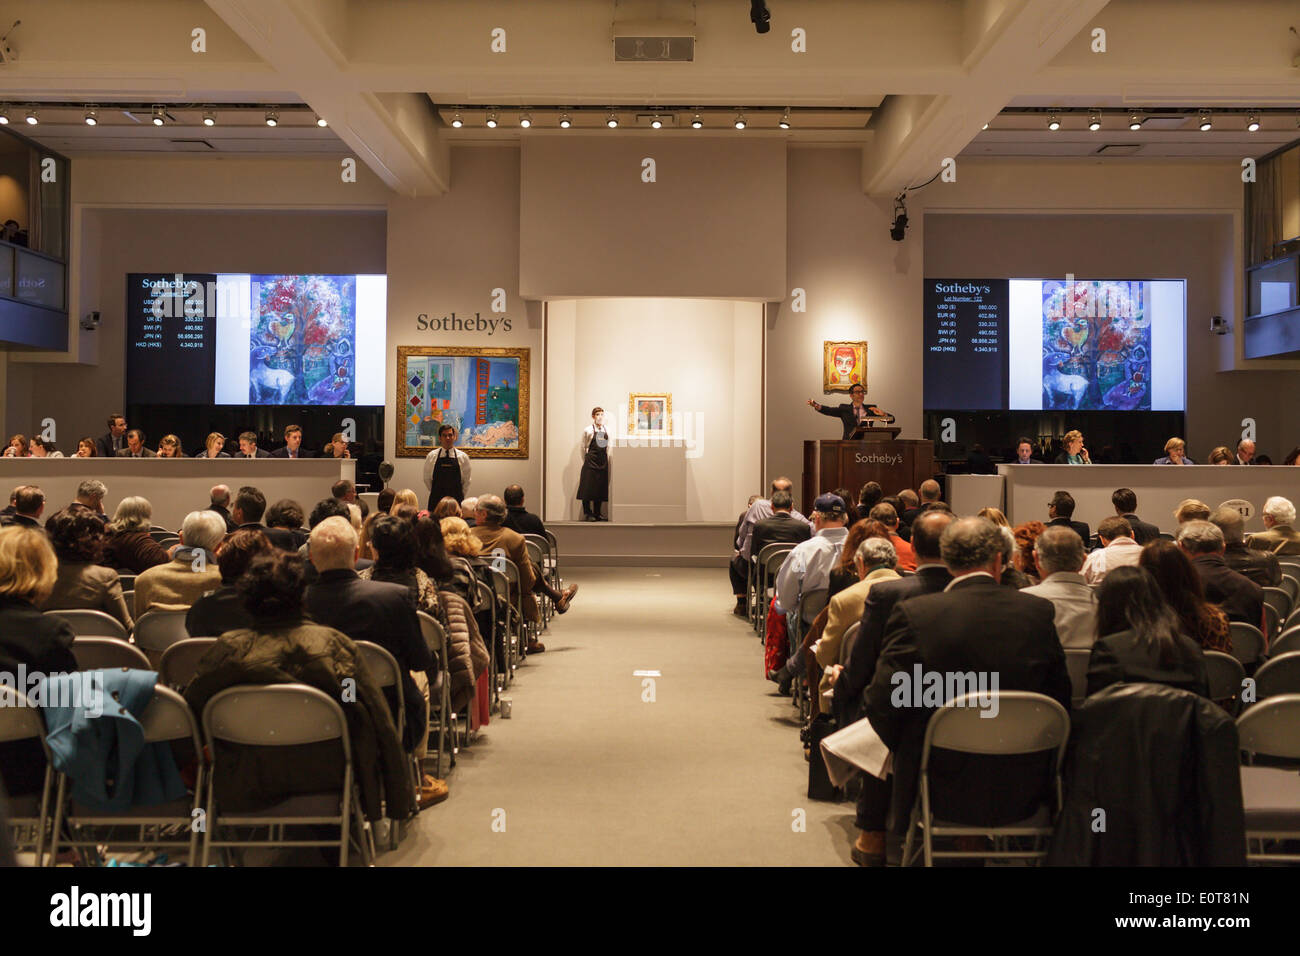 Bidding under way on a Chagall painting, Sotheby's fine art auction, New York, New York, USA Stock Photo